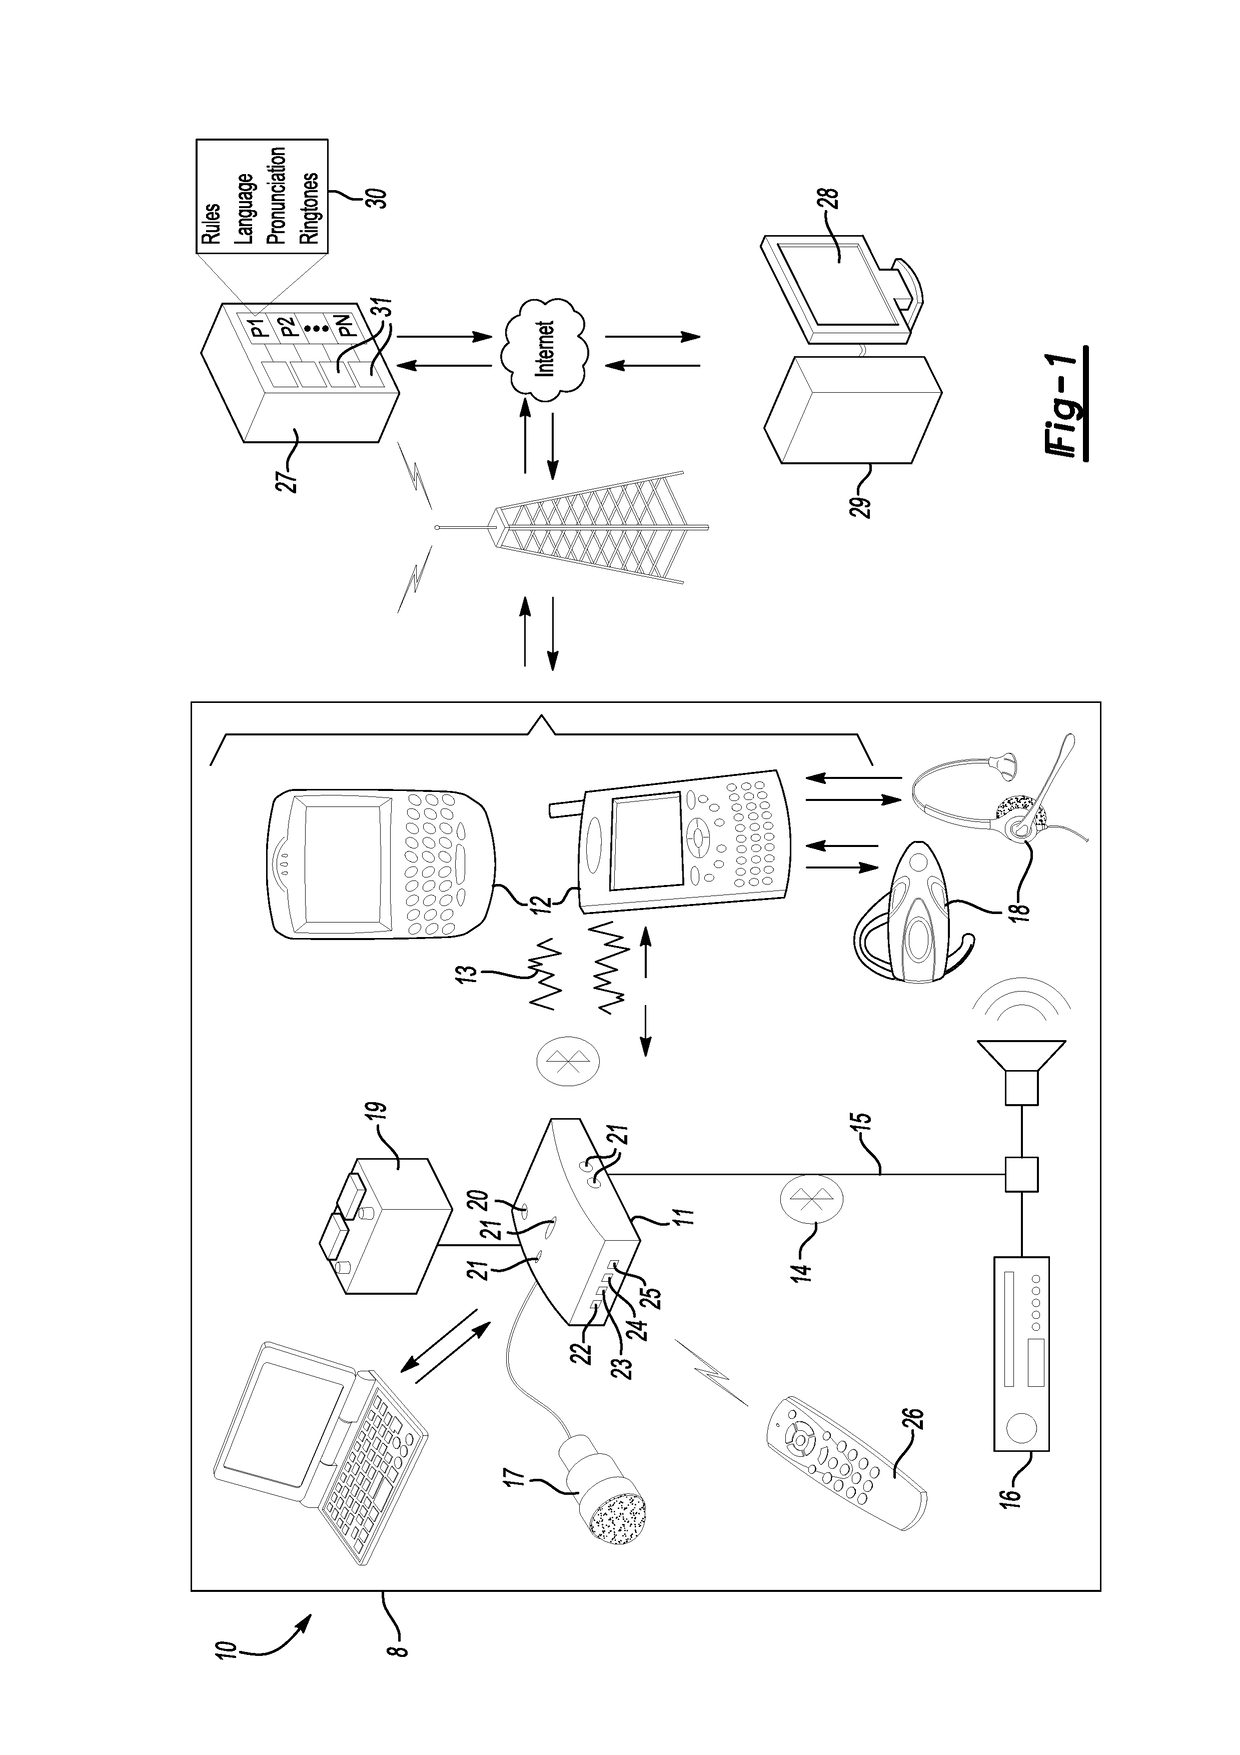 Vehicle communication system with navigation